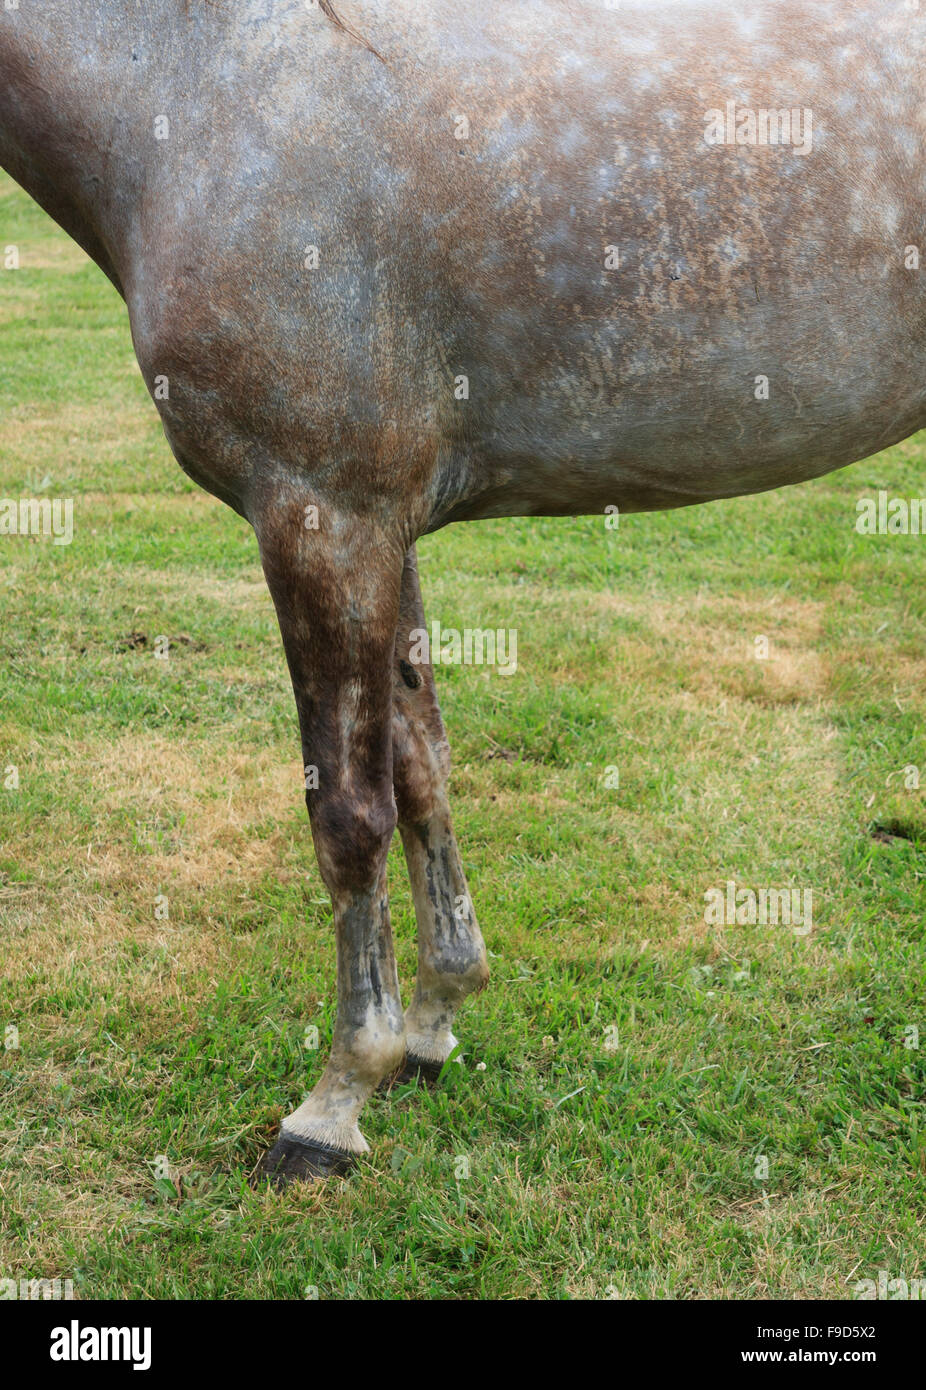 Horse skin and grass textures Stock Photo